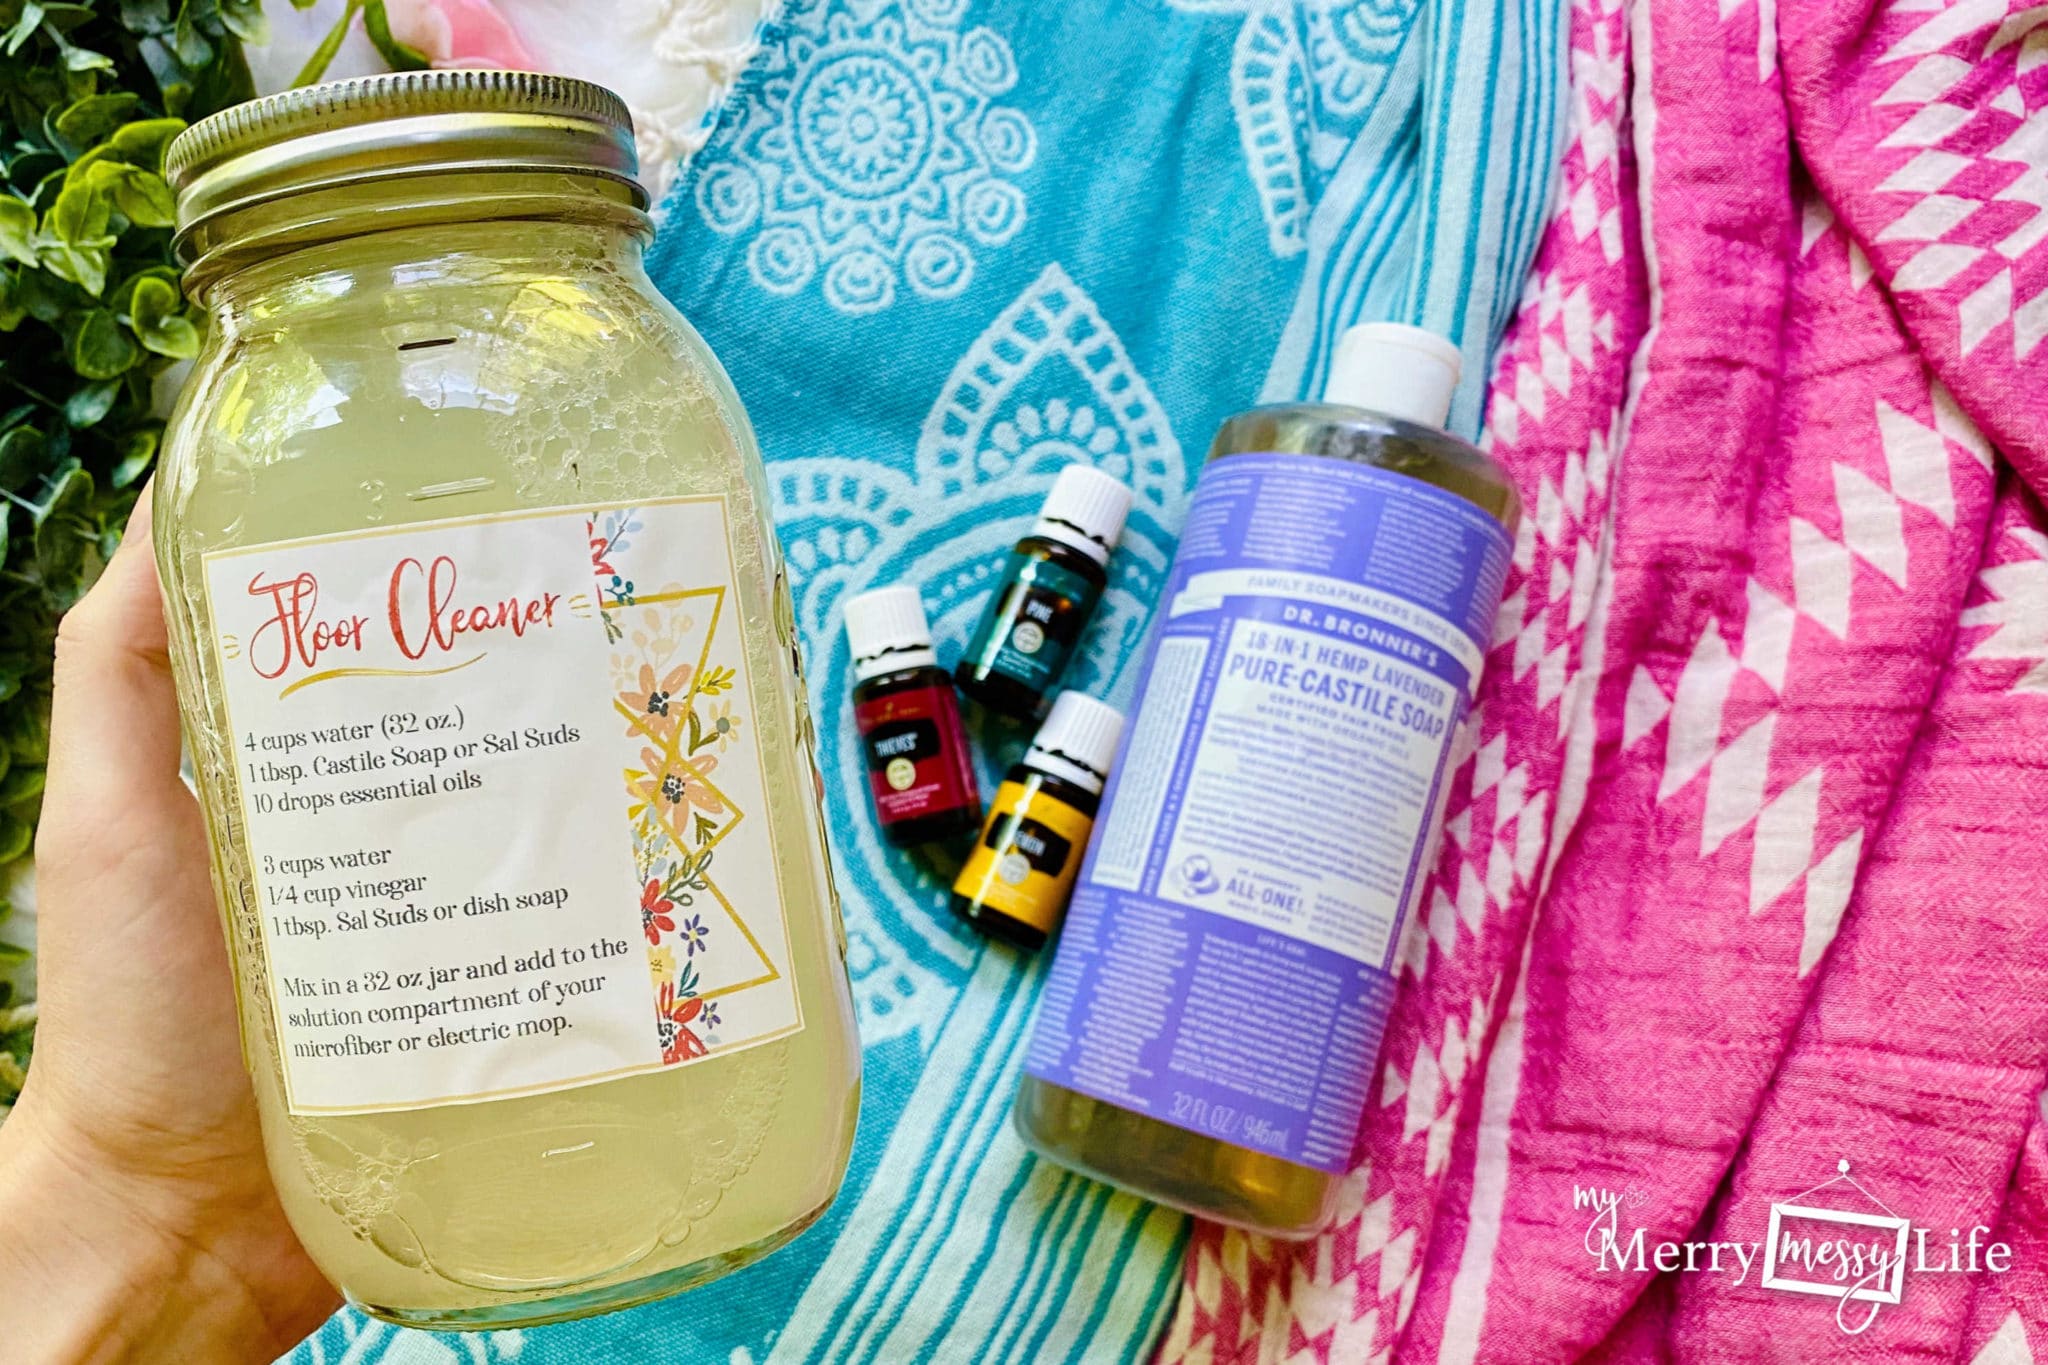 DIY Natural Hardwood and Floor Cleaner using Castile Soap and Essential Oils